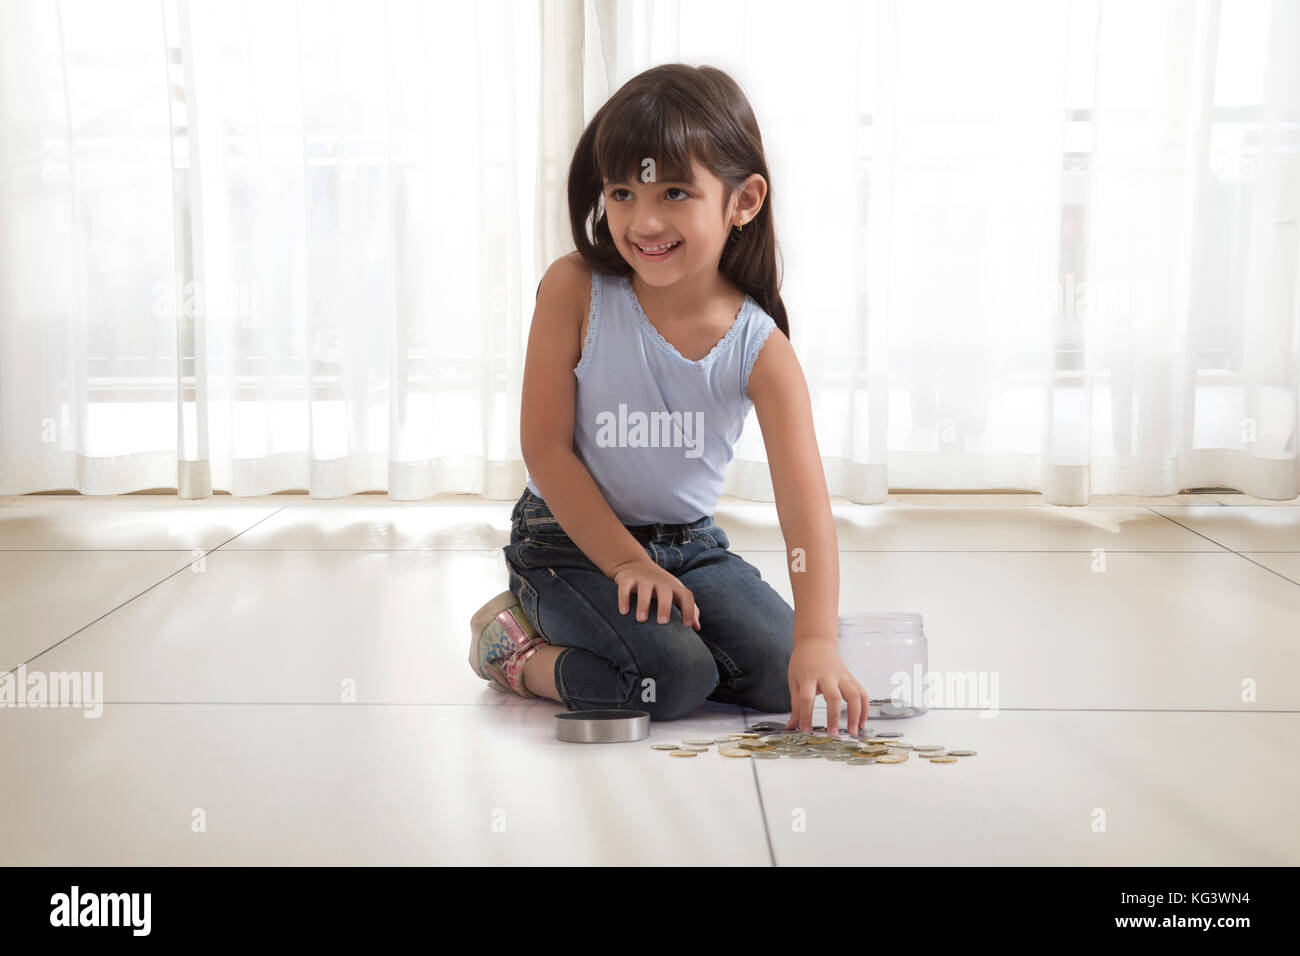 little girl with coin box and coins on floor Stock Photo